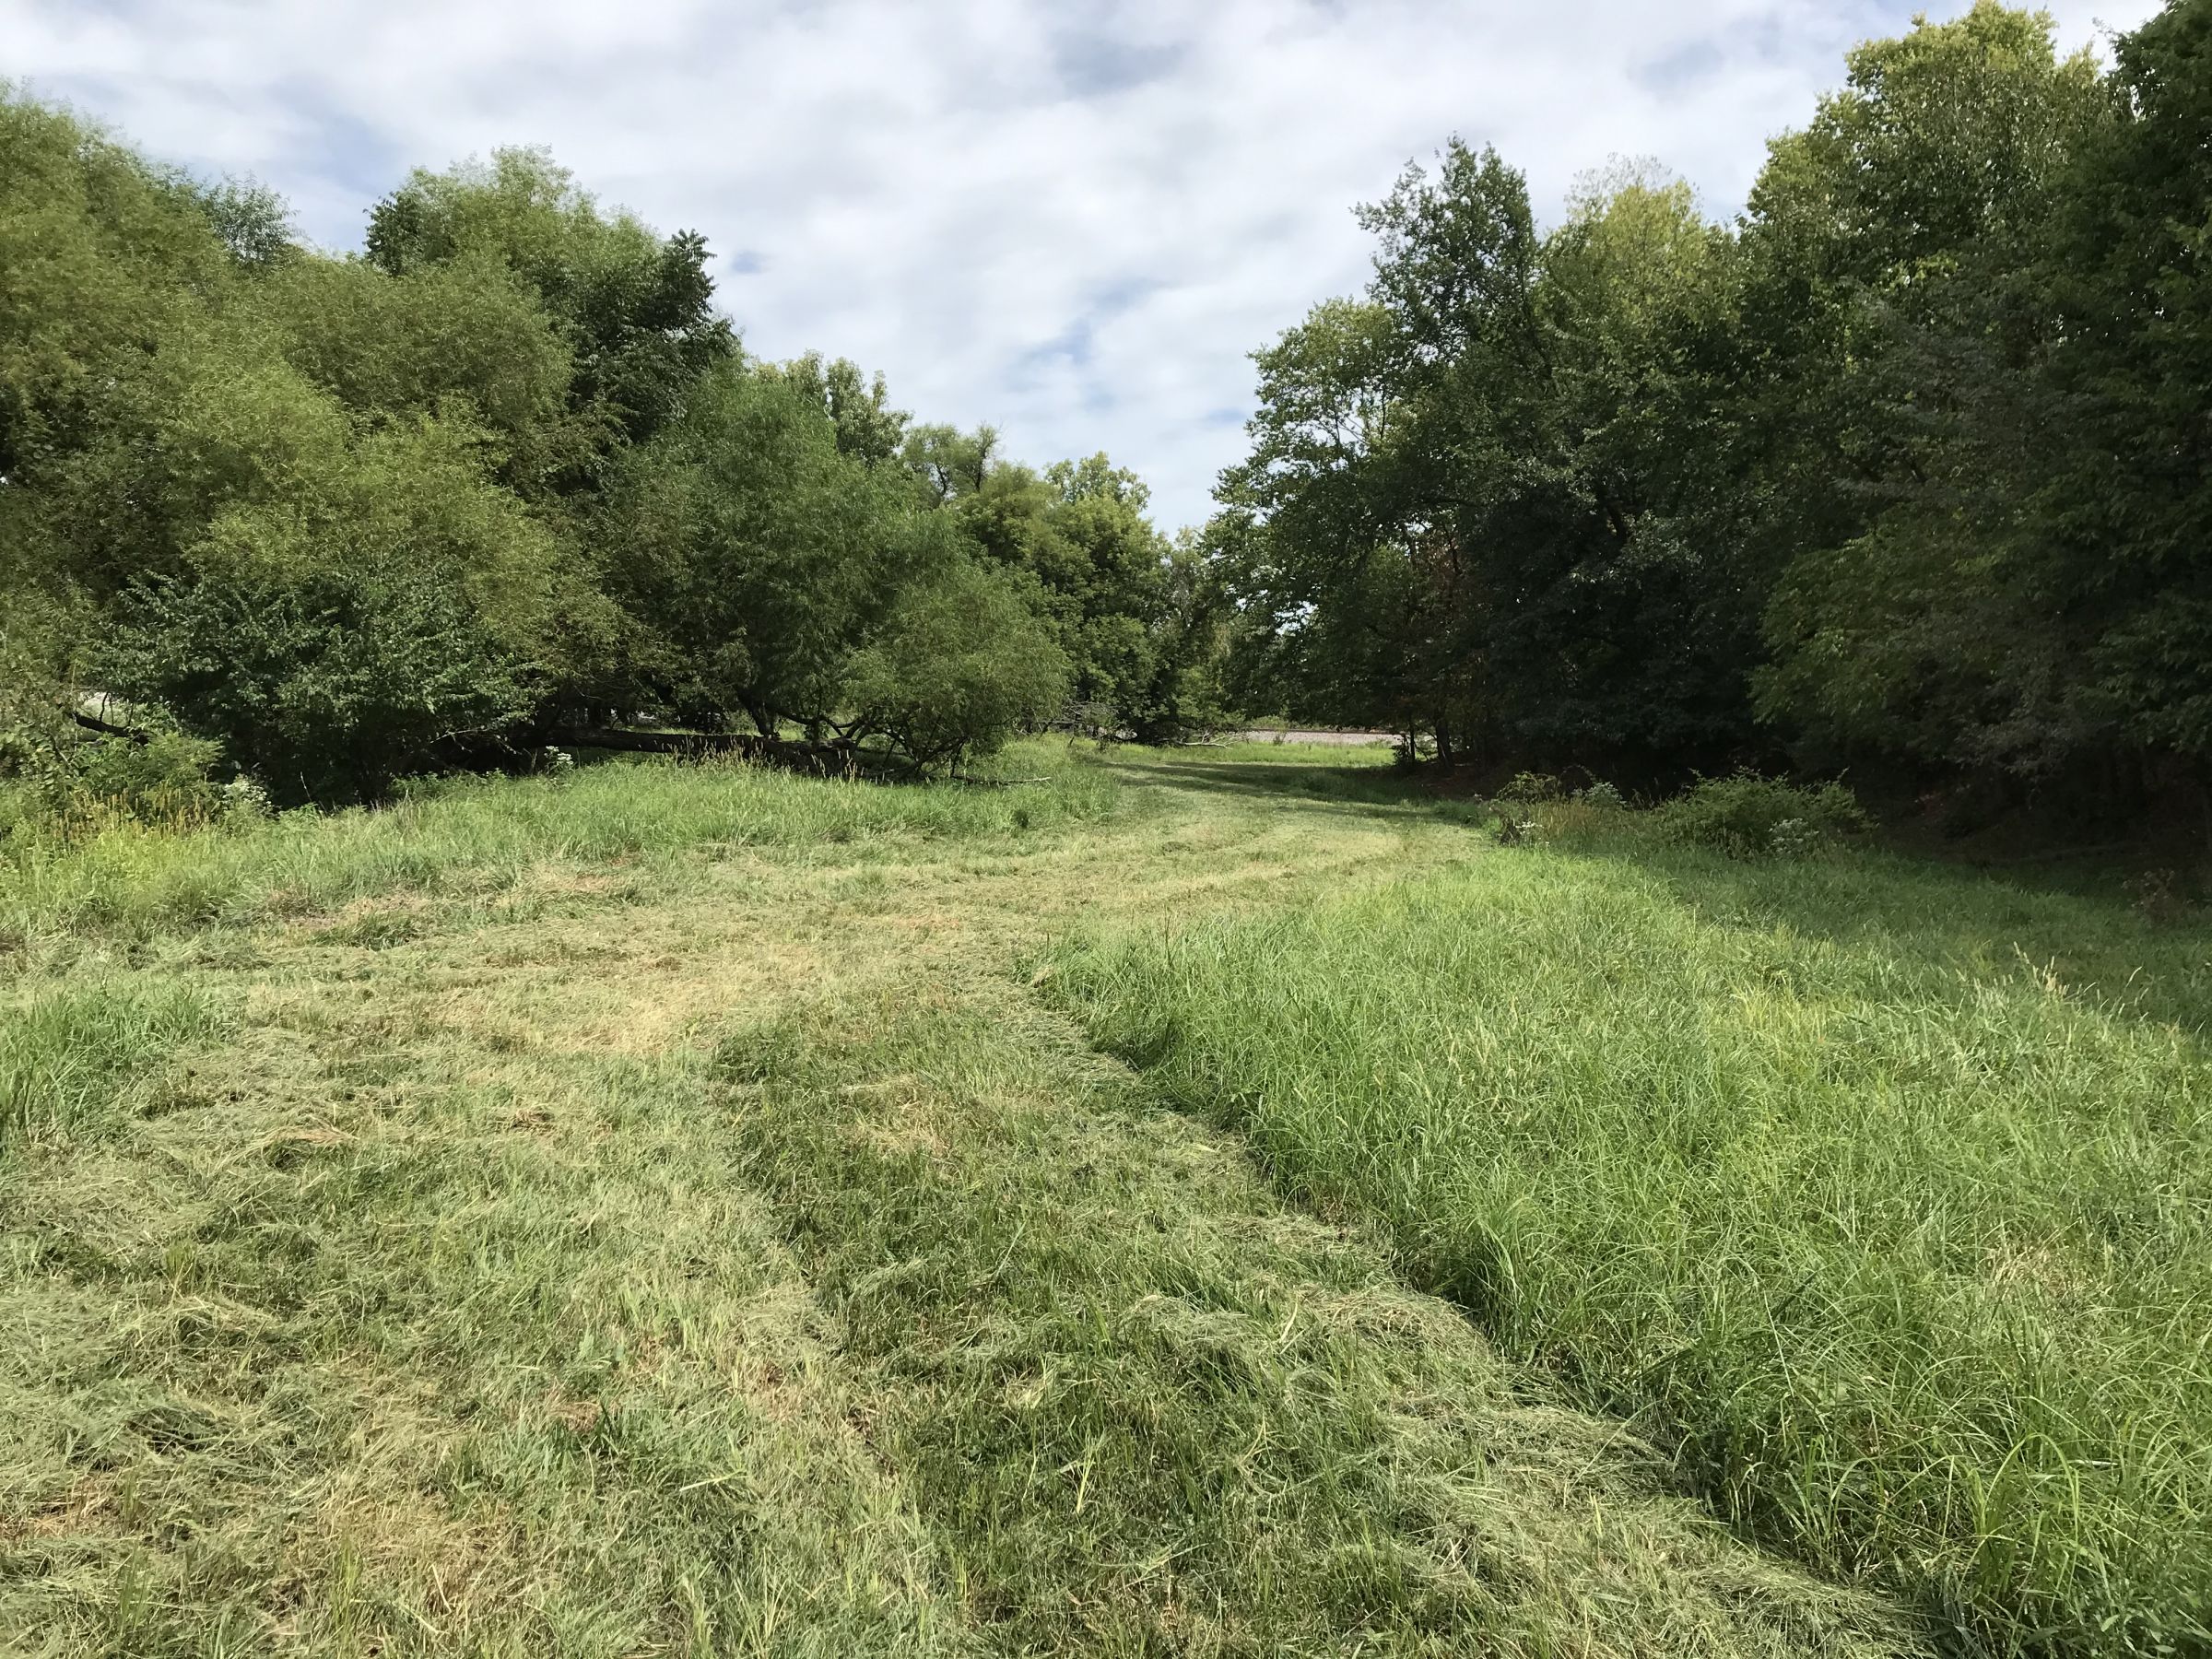 land-lucas-county-iowa-17-acres-listing-number-15148-1-2020-09-01-164843.JPG